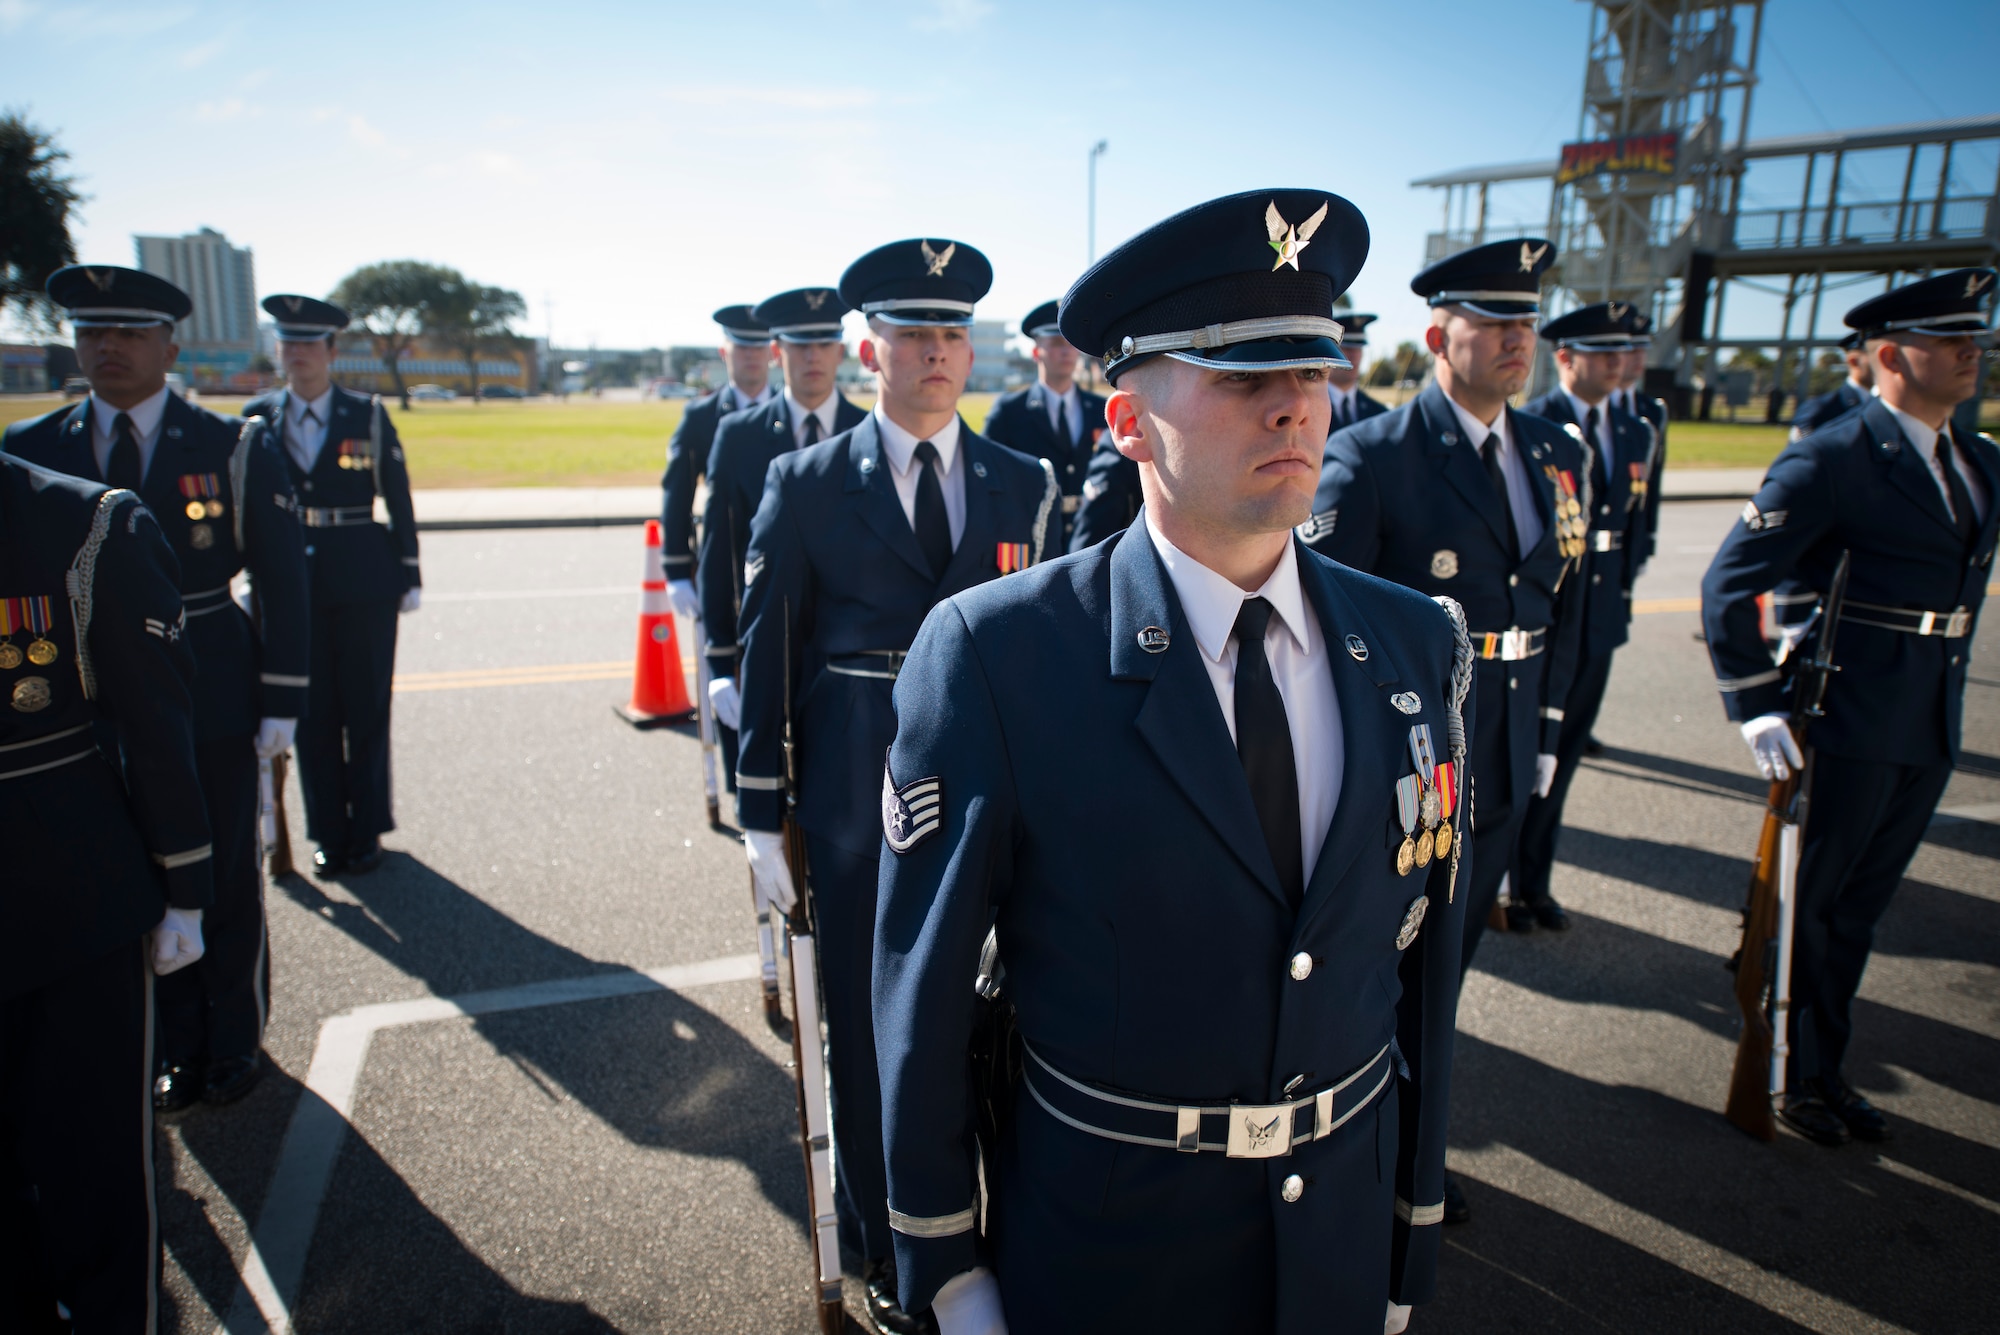 Members of the United States Air Force Honor Guard stand at attention after performing in a Martin Luther King Jr. parade in Myrtle Beach, S.C. Jan. 18, 2016. Myrtle Beach was one of several locations the Honor Guard performed at during their most recent public outreach mission. (U.S. Air Force photo by Staff Sgt. Chad C. Strohmeyer/Released)